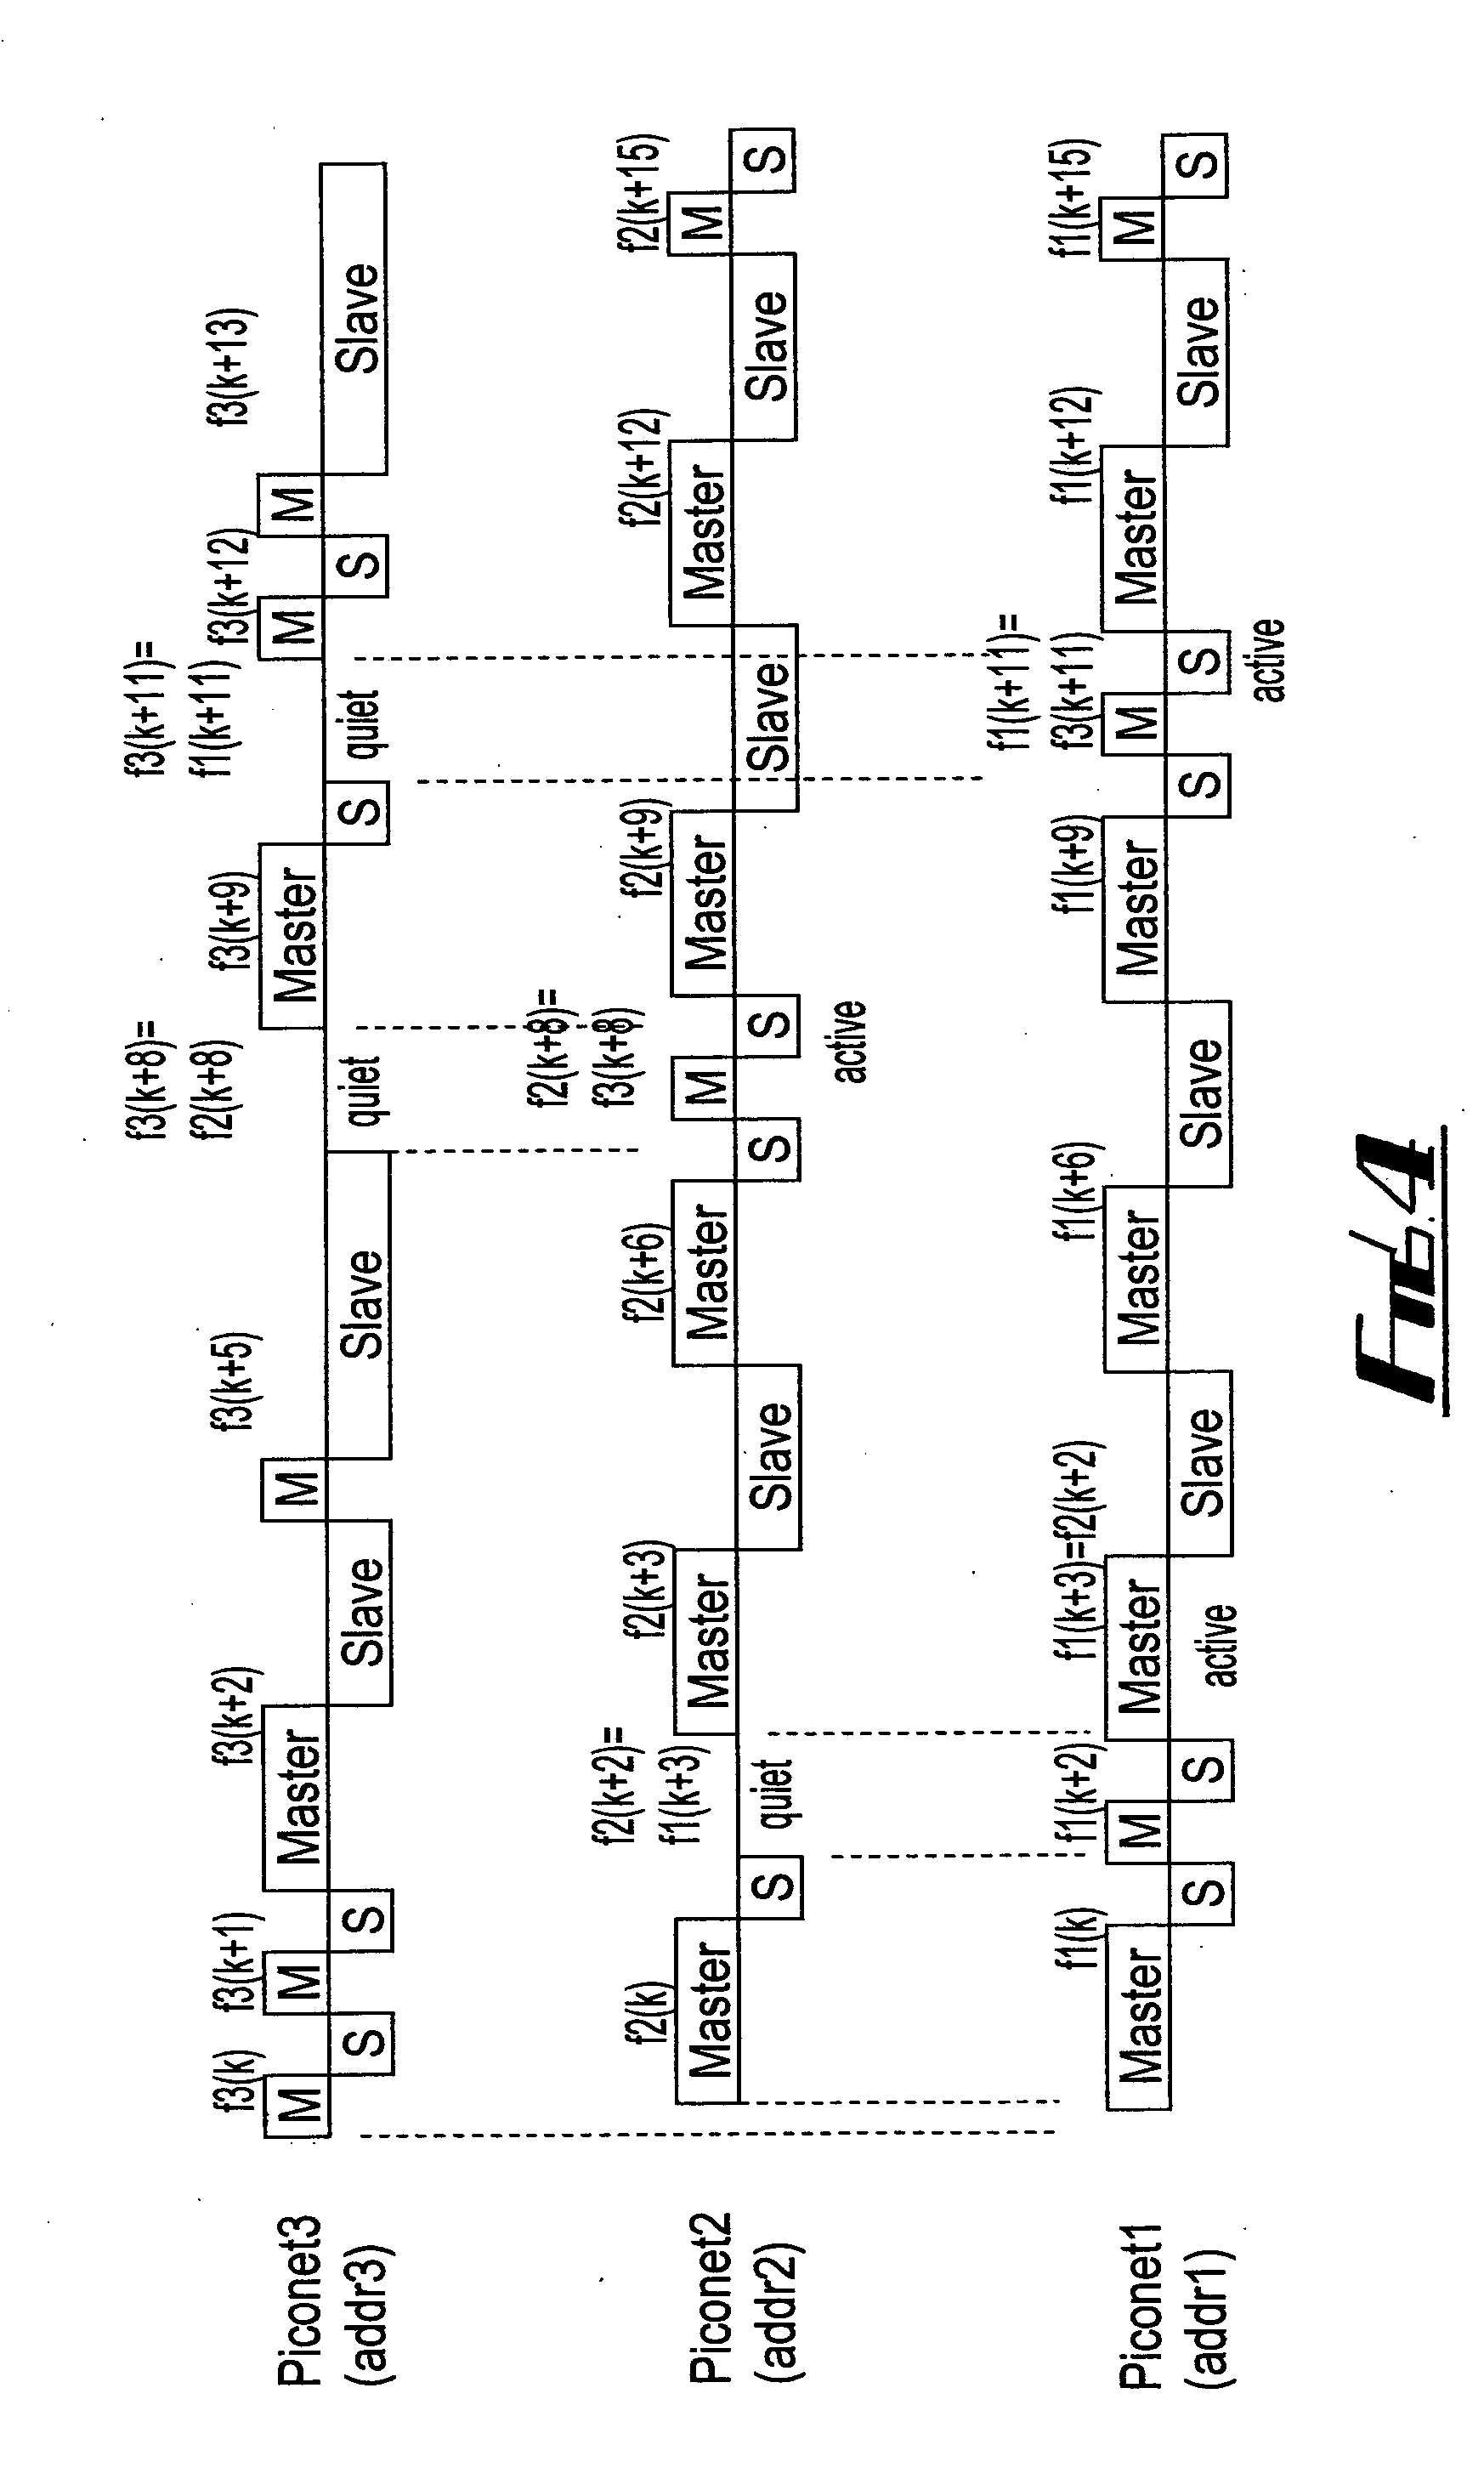 Method for reducing radio interference in a frequency-hopping radio network